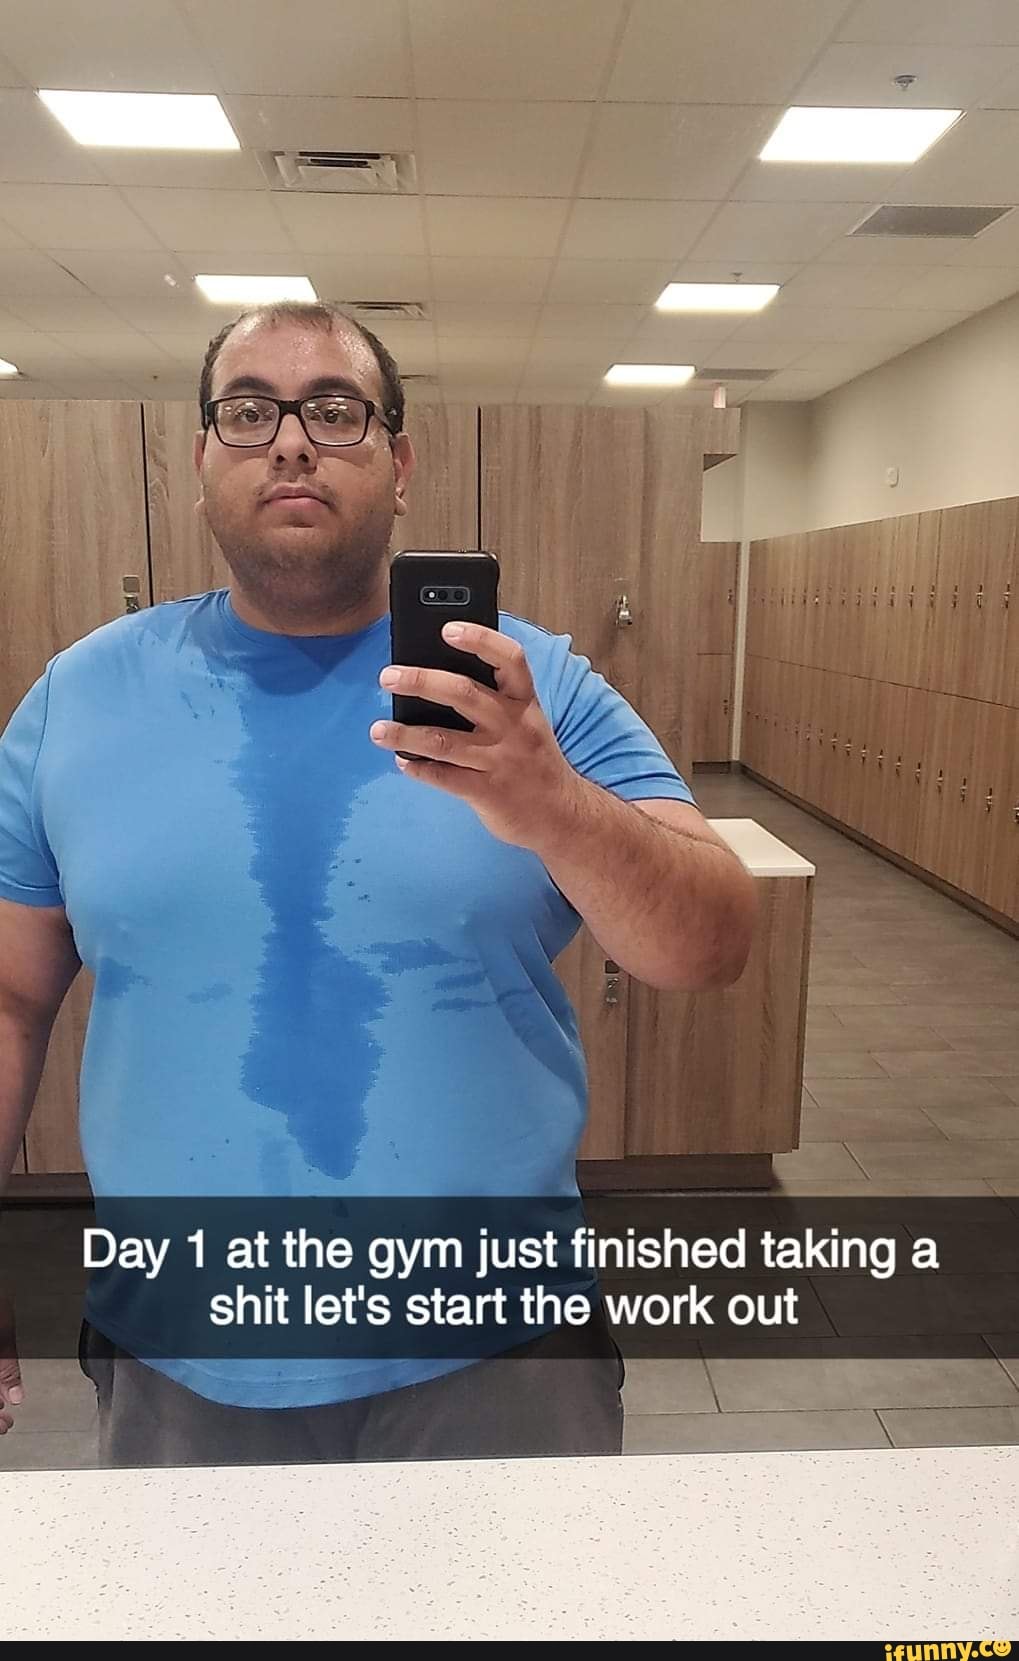 Day 1 at the gym just finished taking a shit let's start the work out